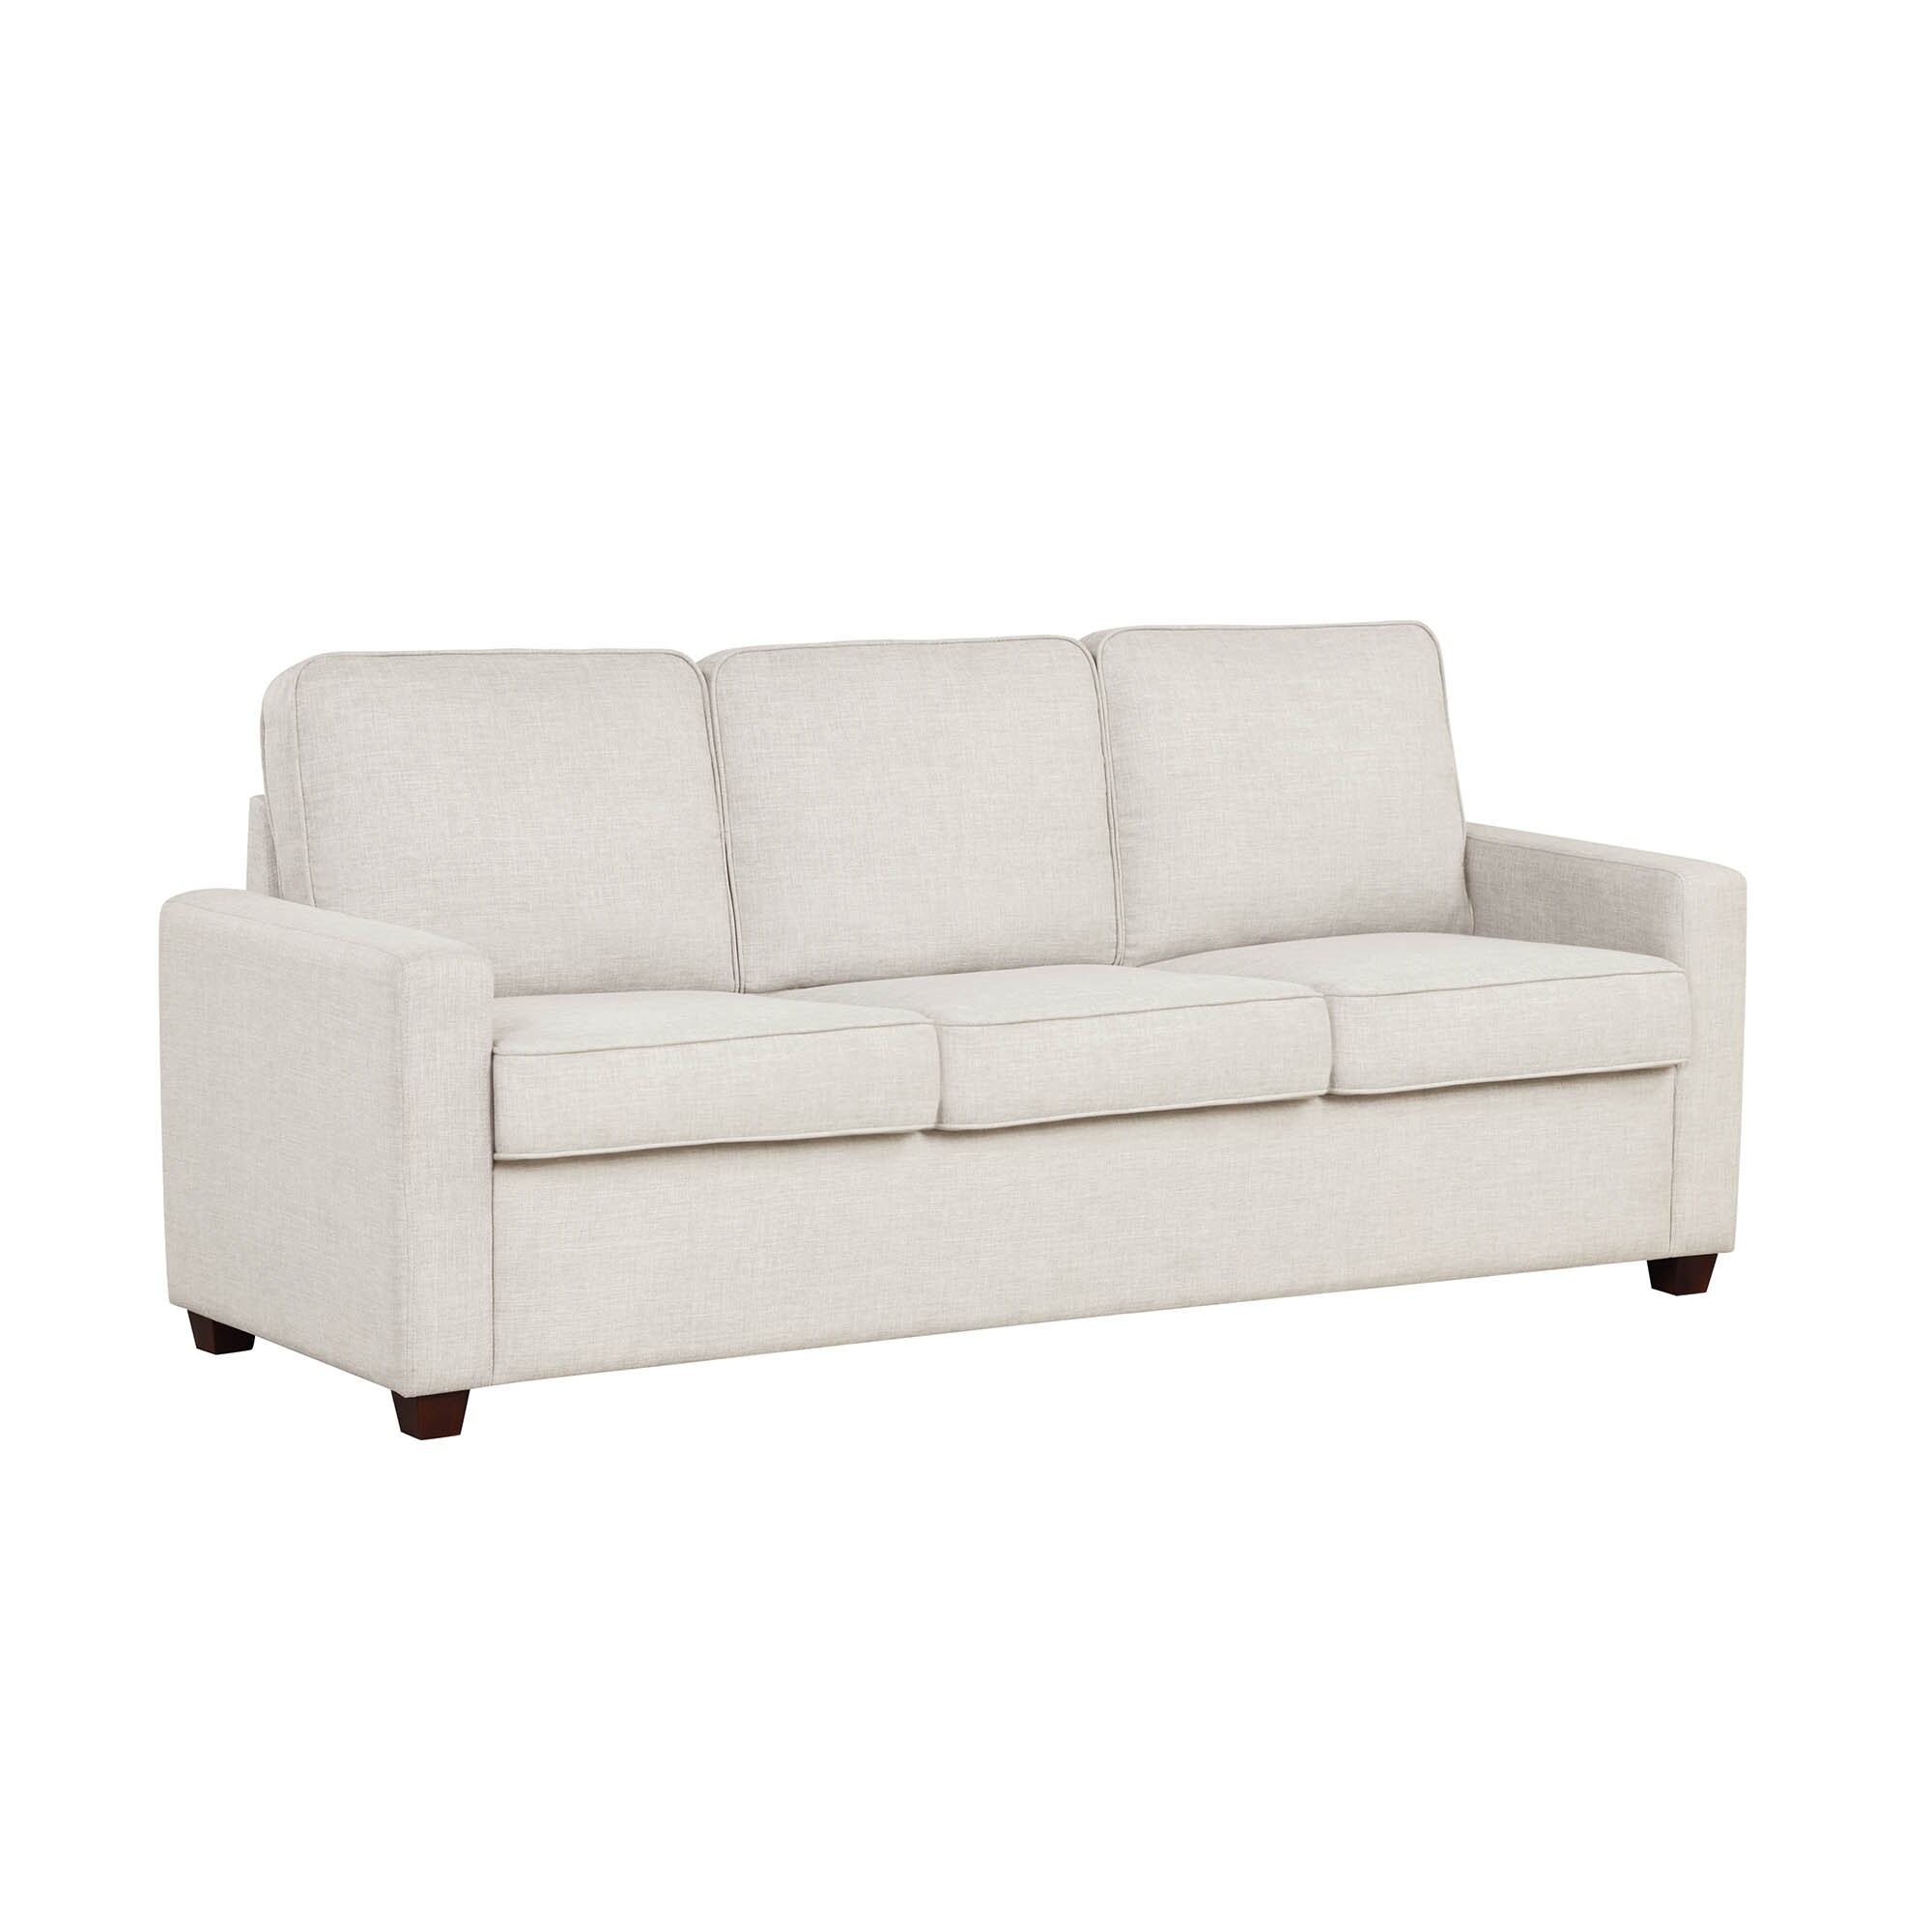 Off-white Futons & Sofa Beds at